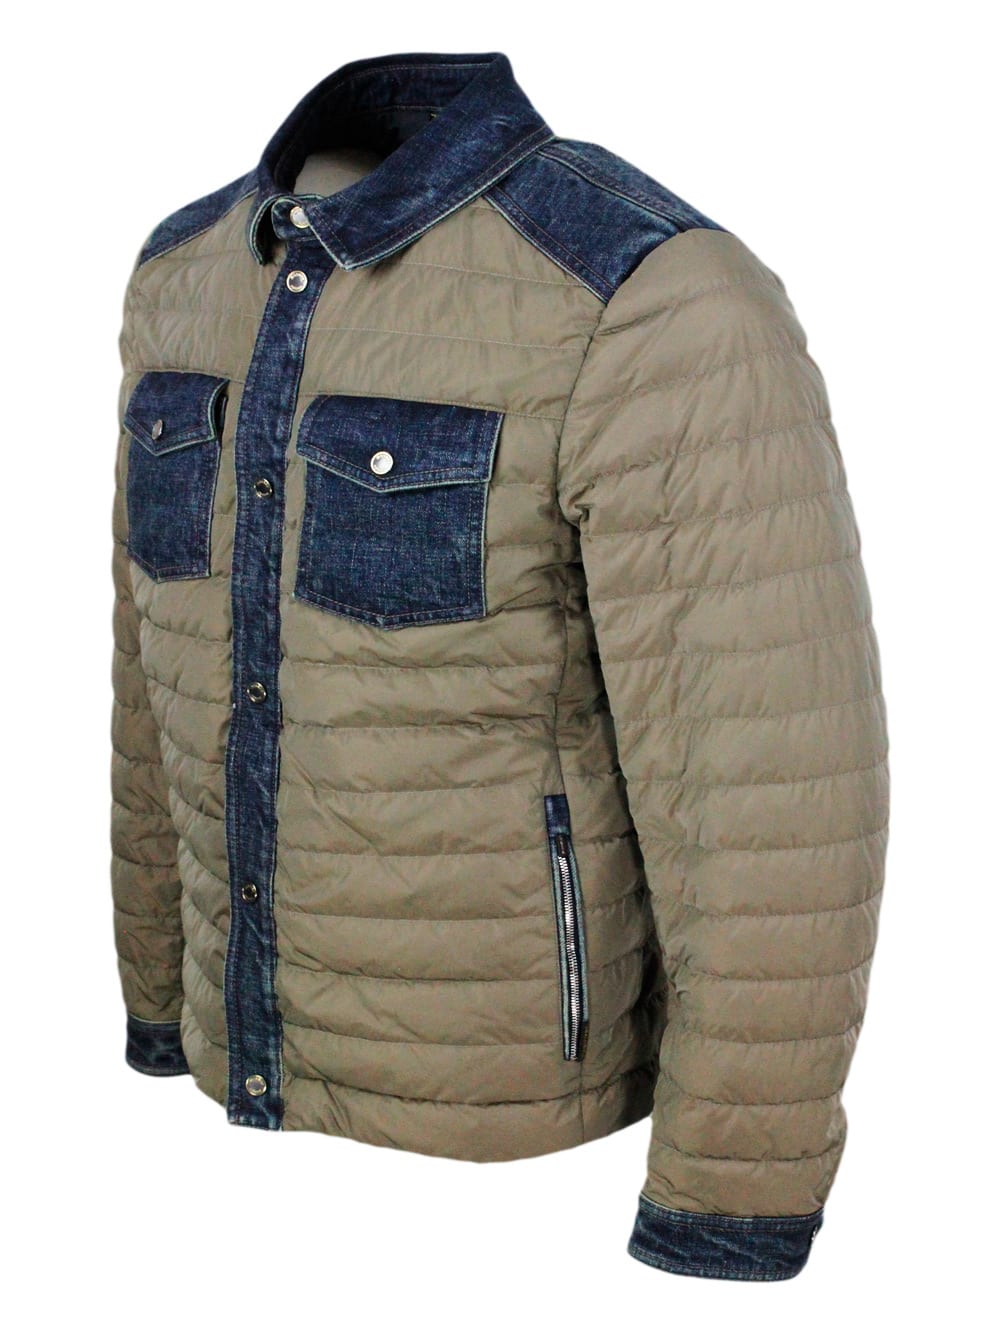 Shop Moorer 100 Gram Light Down Jacket With Denim Inserts And Details. Internal And External Side Pockets And Bu In Military